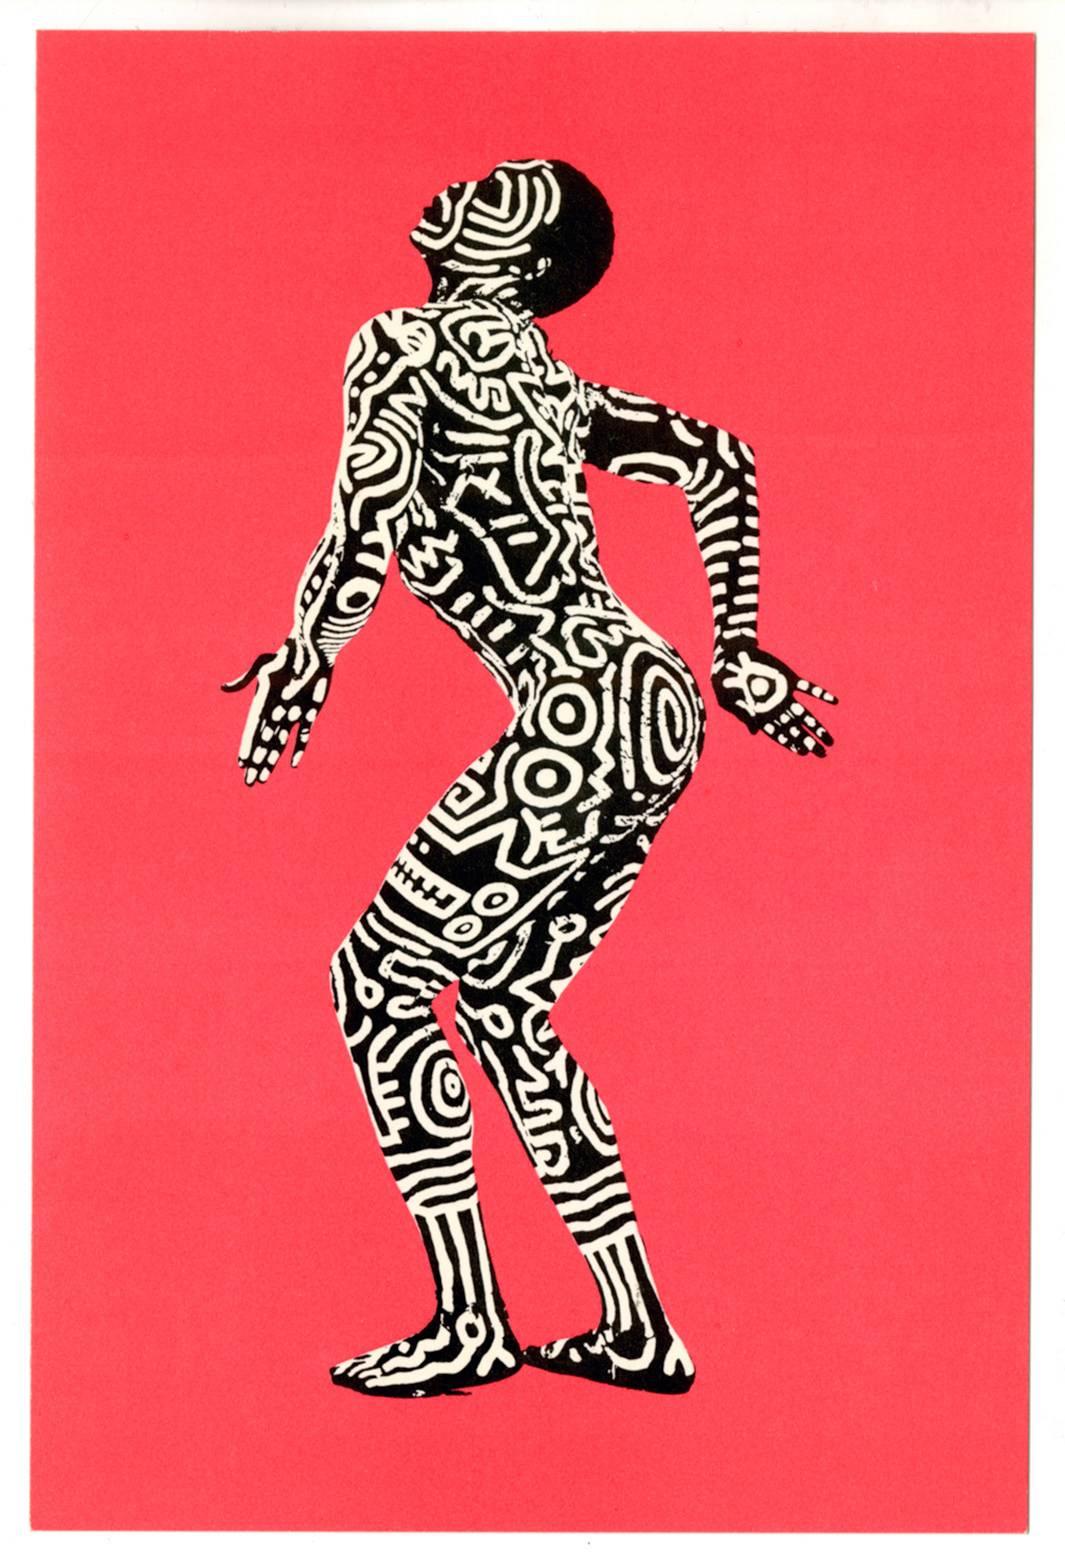 Keith Haring Painted Man: 
A set of 3 announcement cards for Keith Haring’s well-documented exhibition, Keith Haring 'Into 84' at Tony Shafrazi Gallery, New York, 1983.  For this series Haring borrowed Jones' body — from head to toe — as the canvas